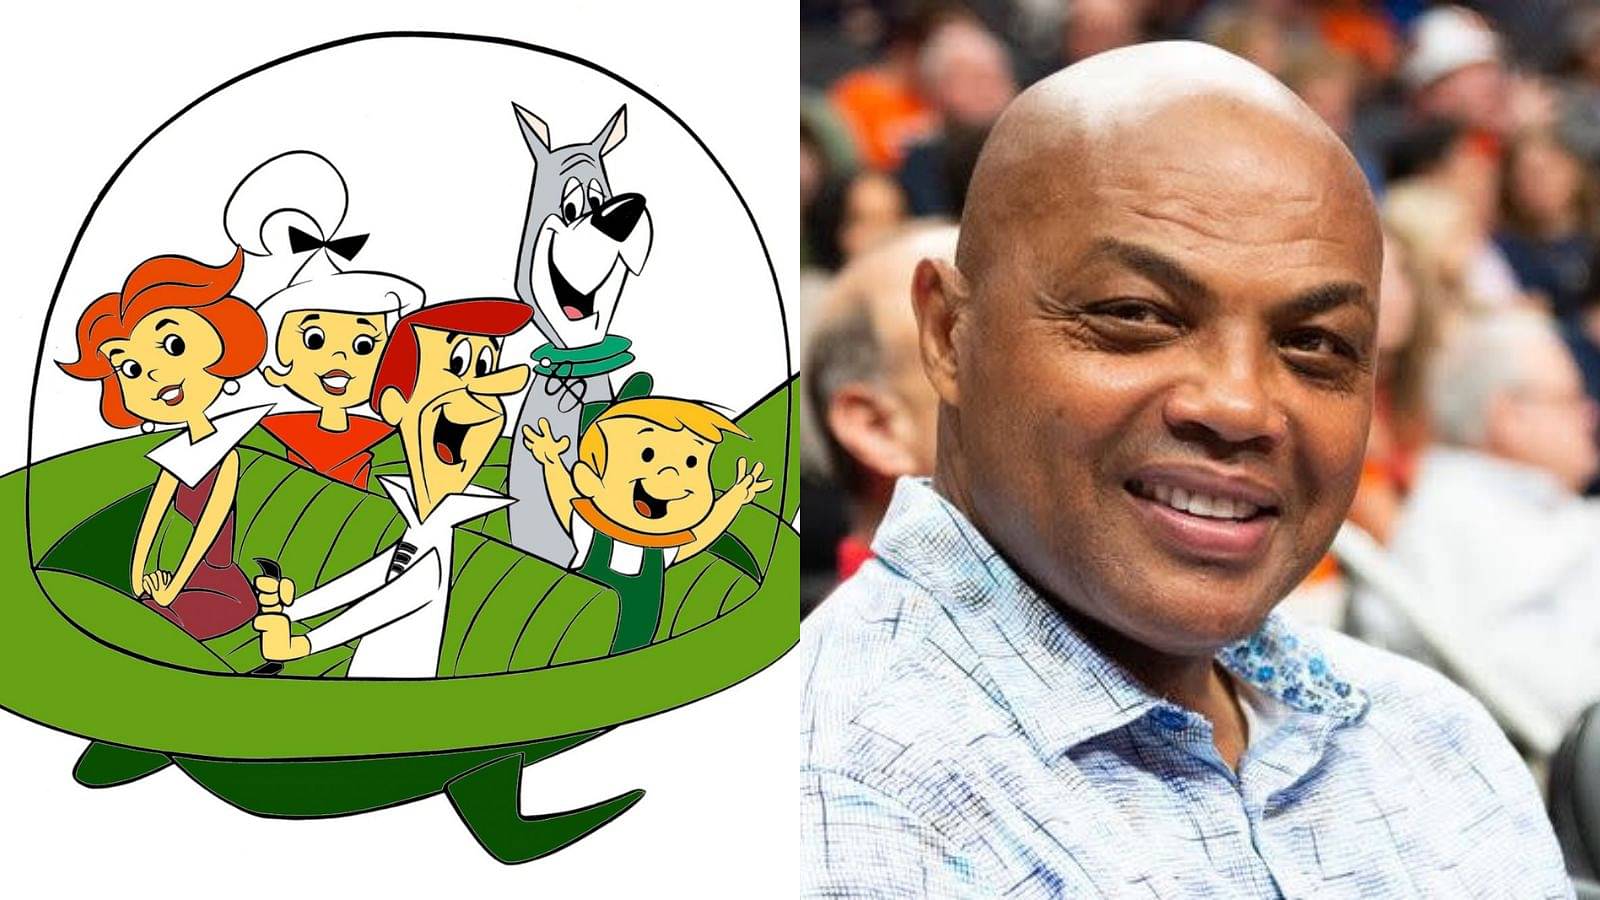 If $50M worth Charles Barkley got paid today's NBA salaries, he'd go to games in a spaceship like "Leroy Jetson"